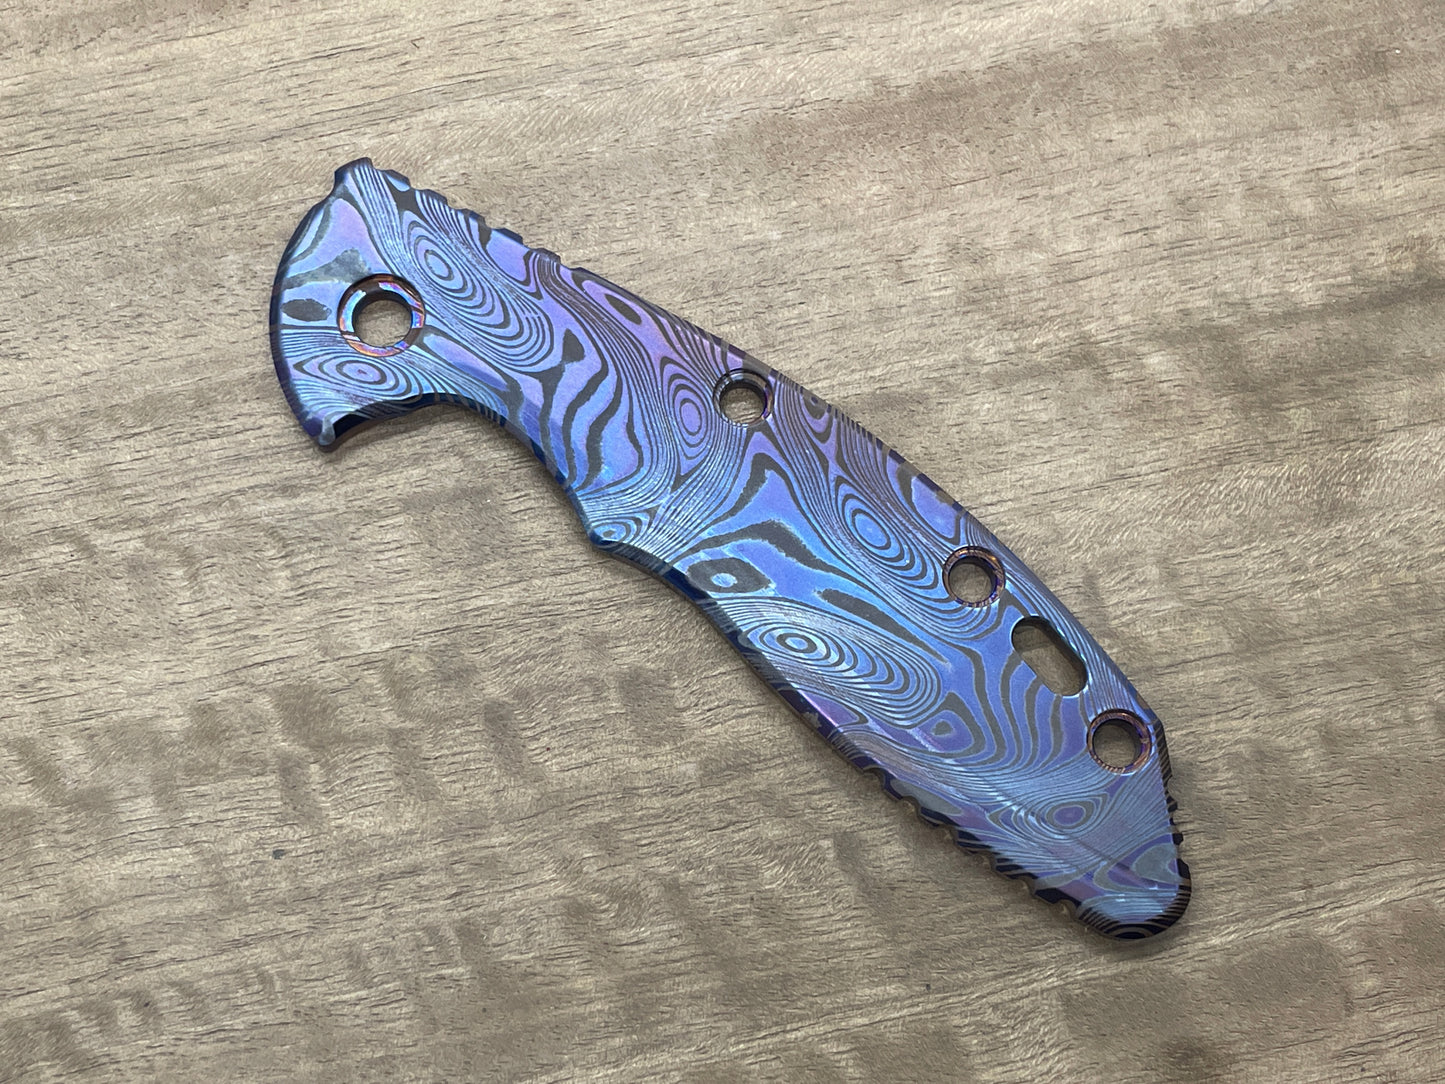 Dama FISH Flamed Titanium scale for XM-18 3.5 HINDERER